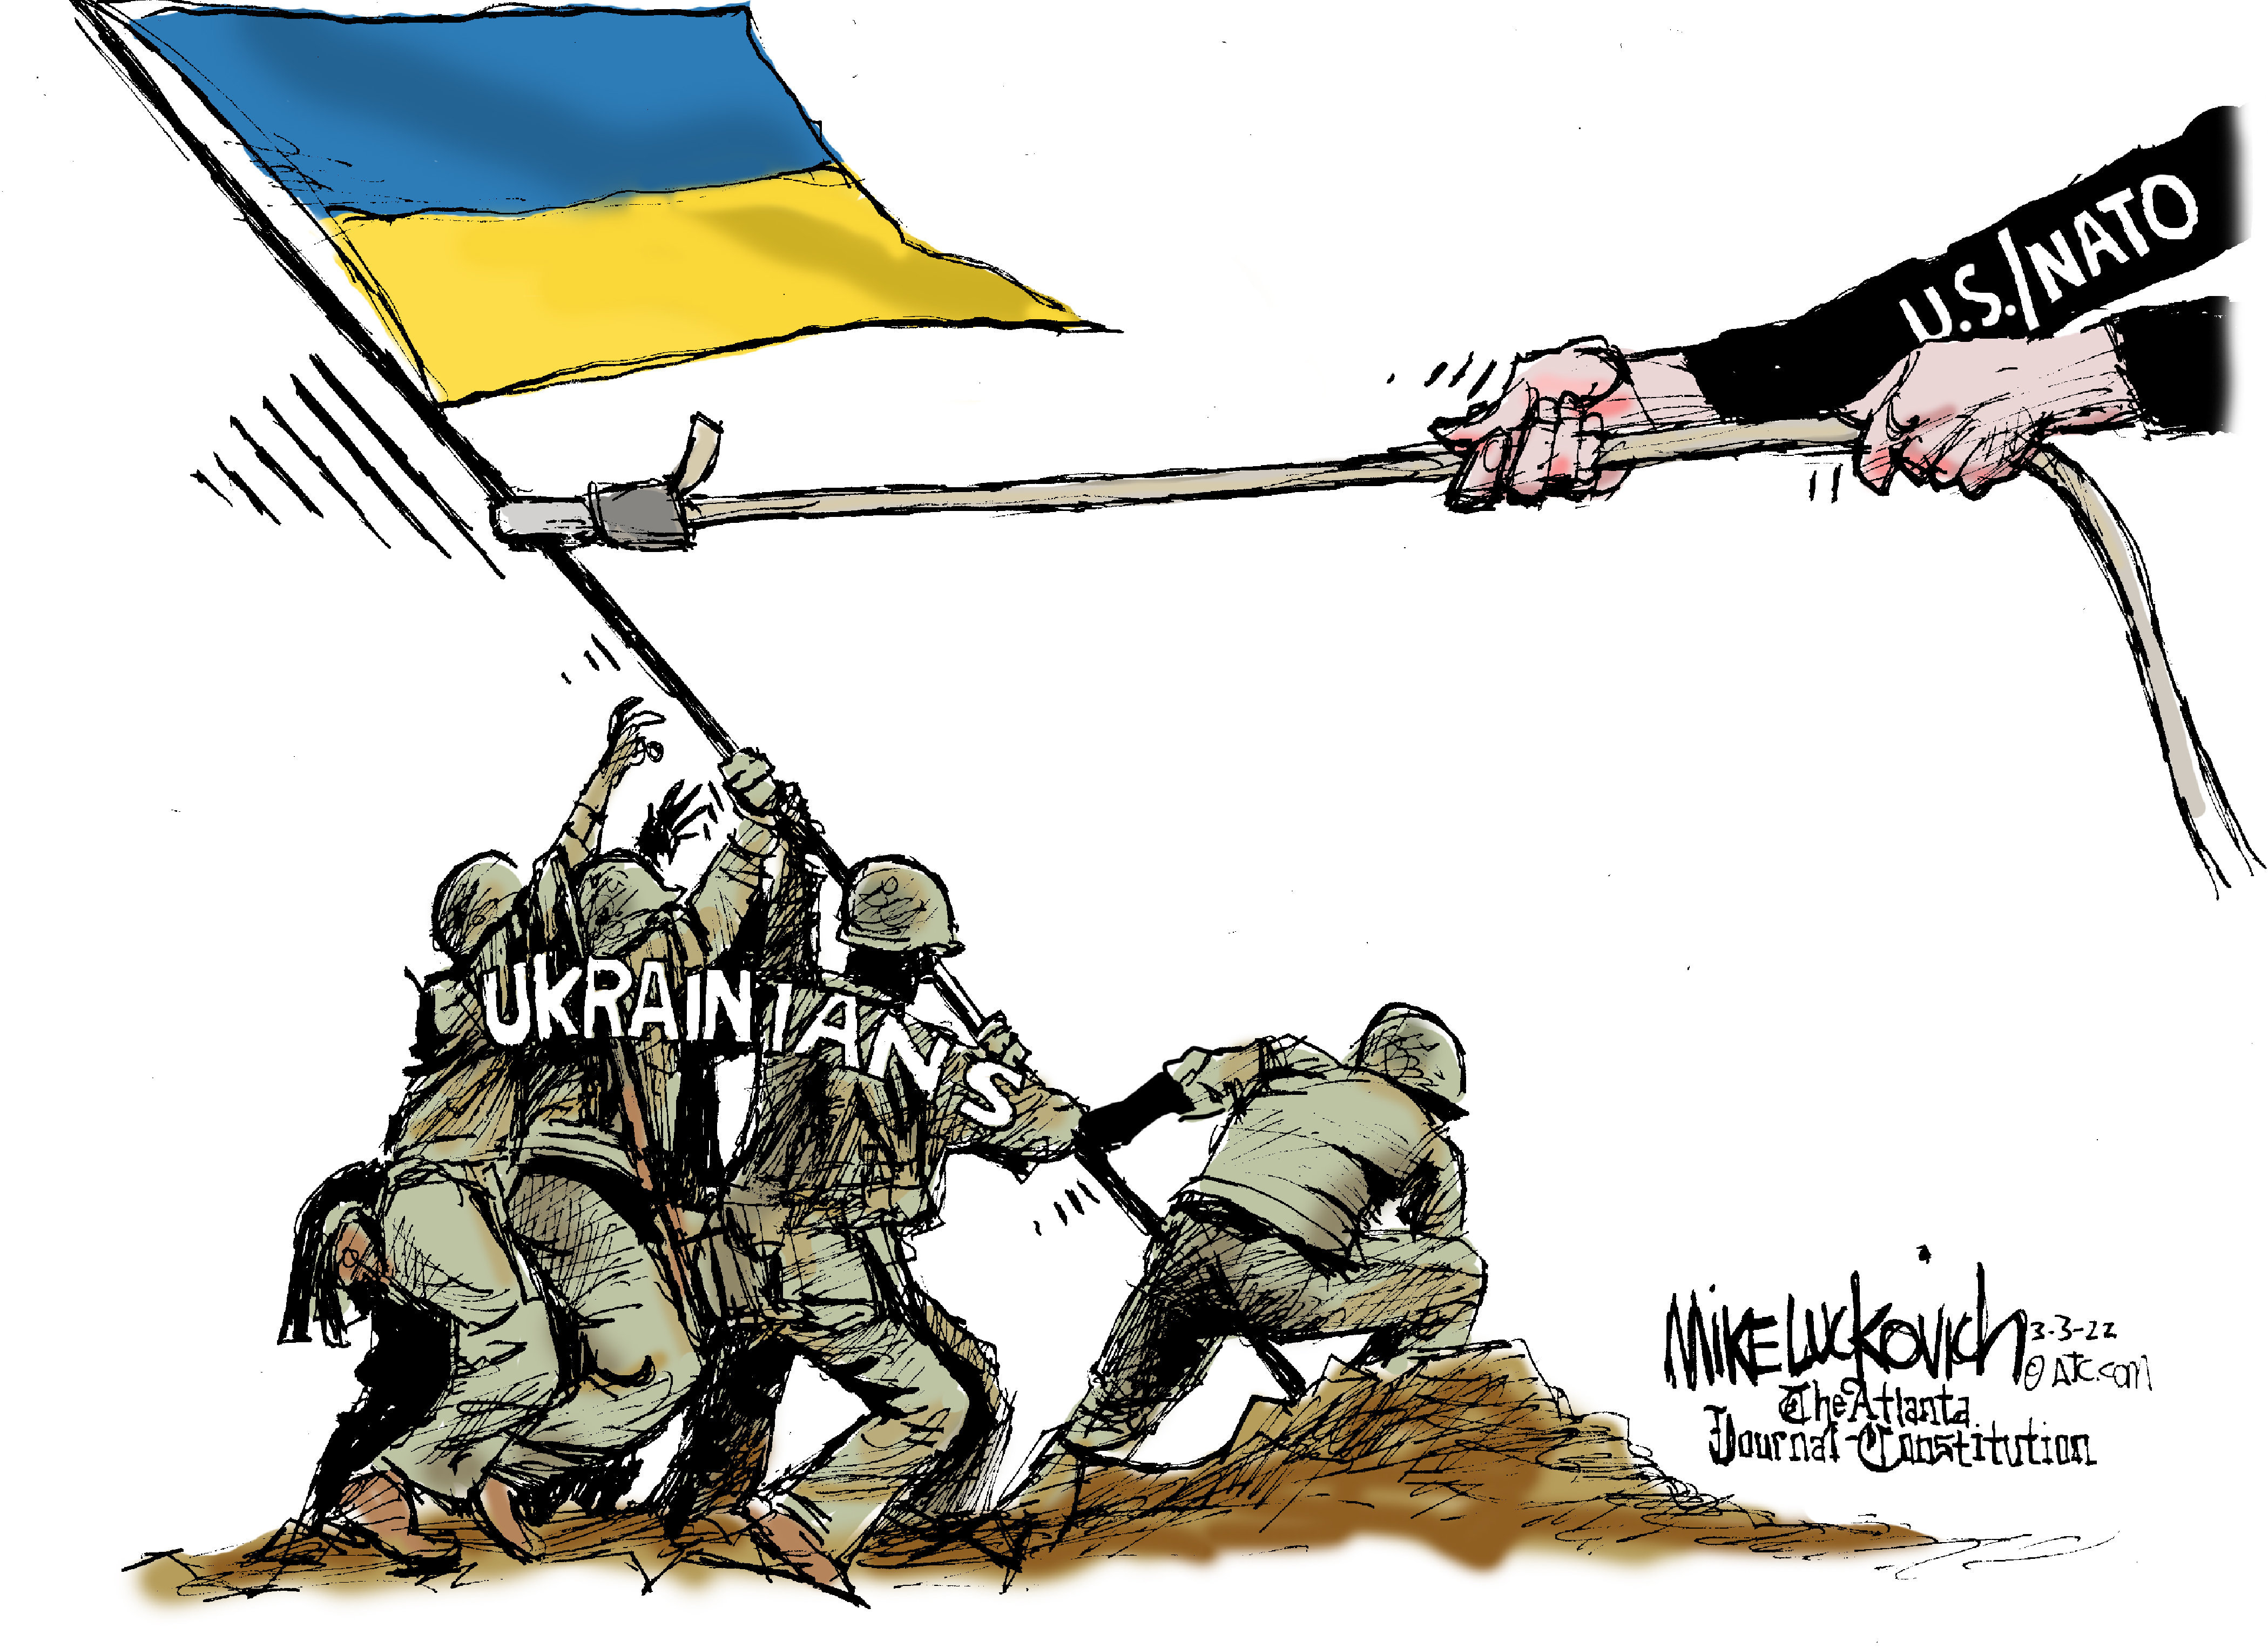 Editorial cartoons for March 6, 2022: Resistance in Ukraine, State of ...